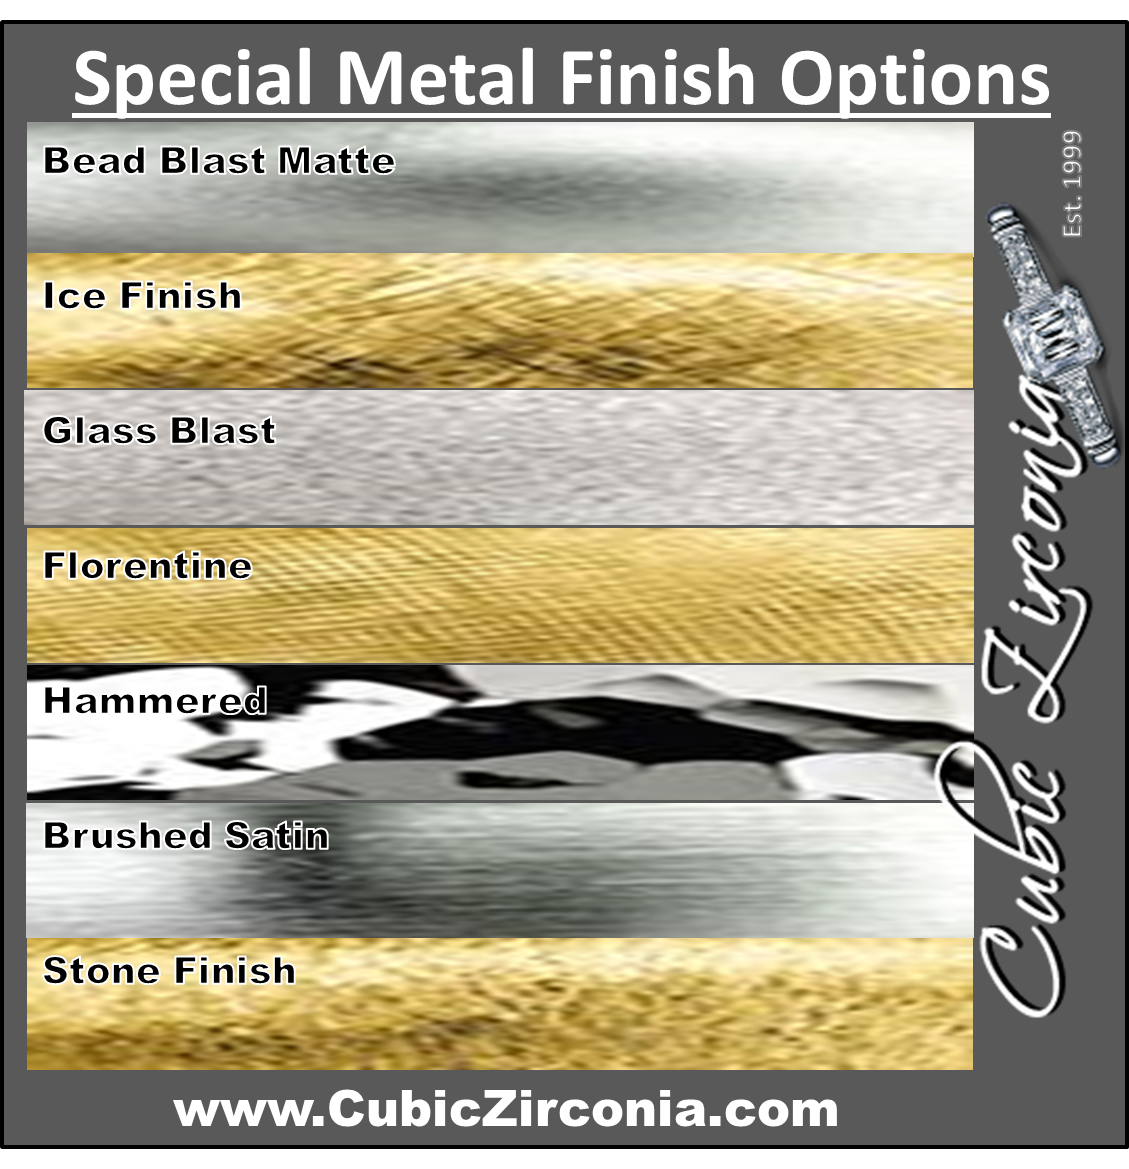 Special Metal Finishes for Wedding Bands and Rings